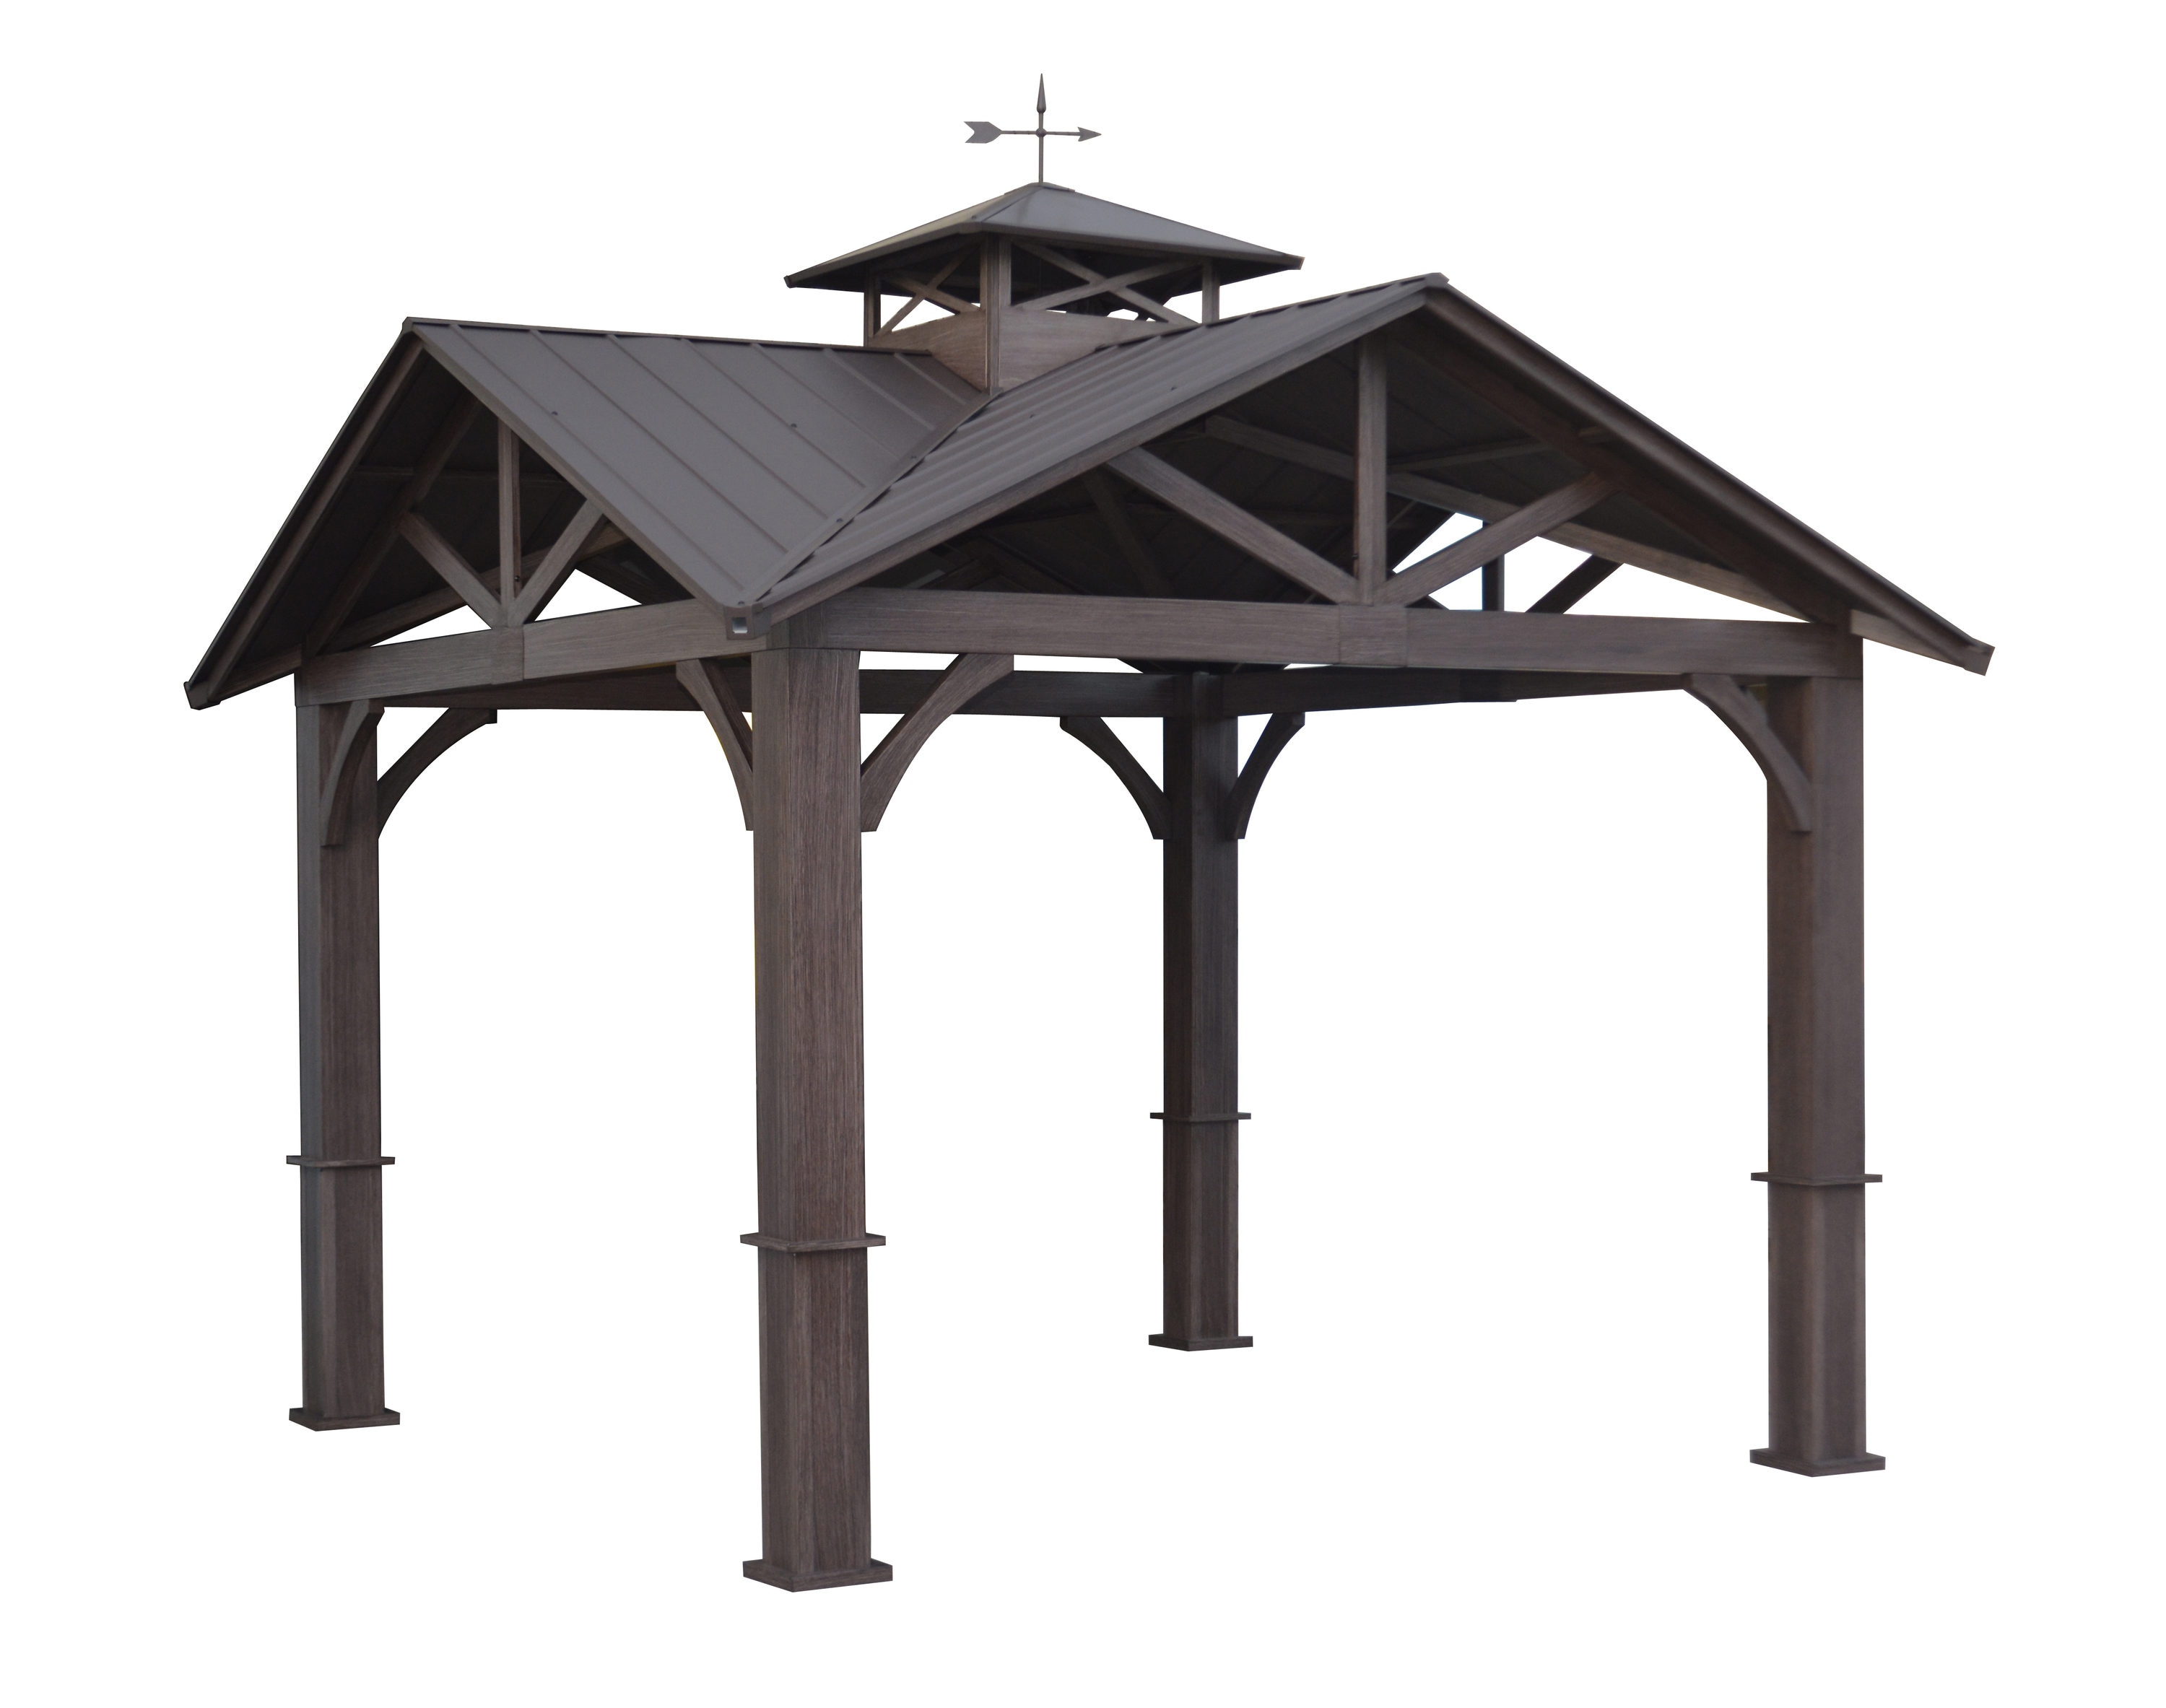 Wood Looking Hand Paint Metal Square Semi-Permanent Gazebo with Steel Roof